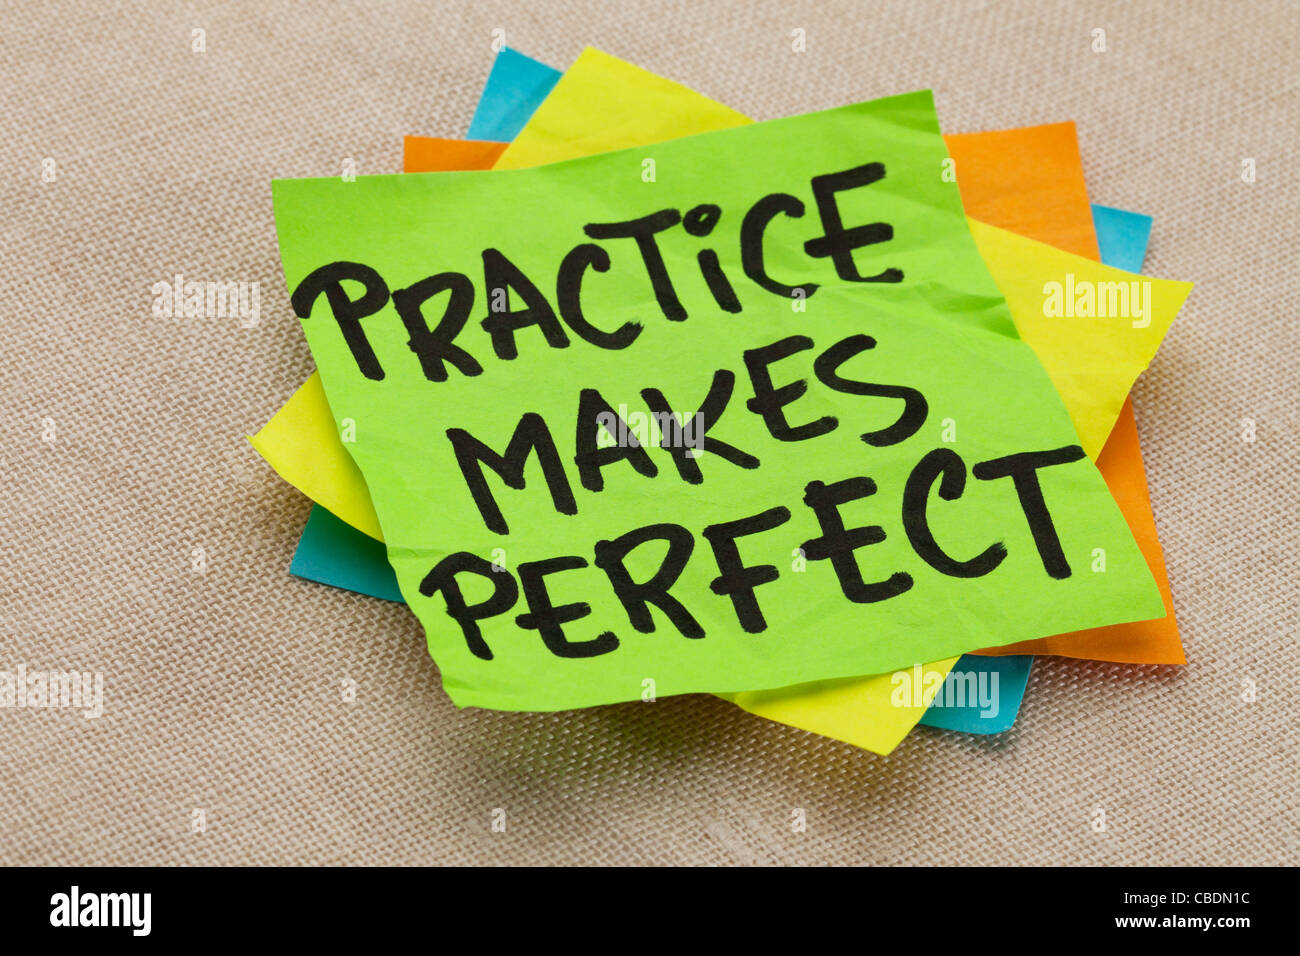 practice makes perfect - a motivational slogan on a green stocky note Stock Photo